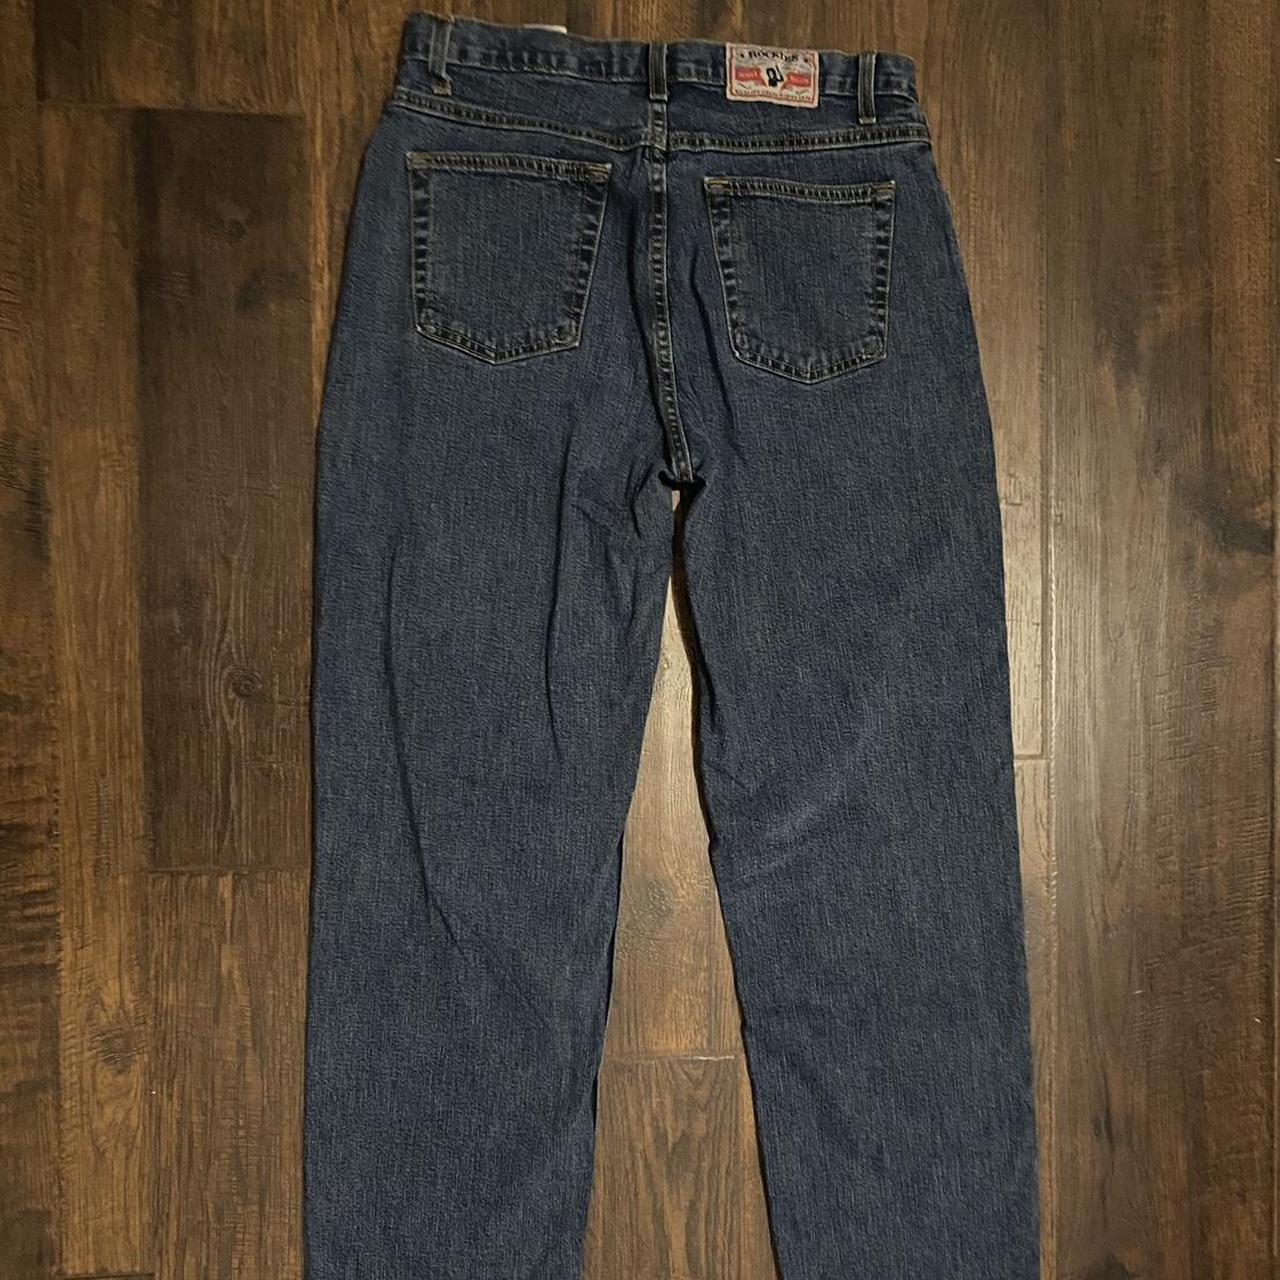 Rockies 90s Relaxed Jeans for Women